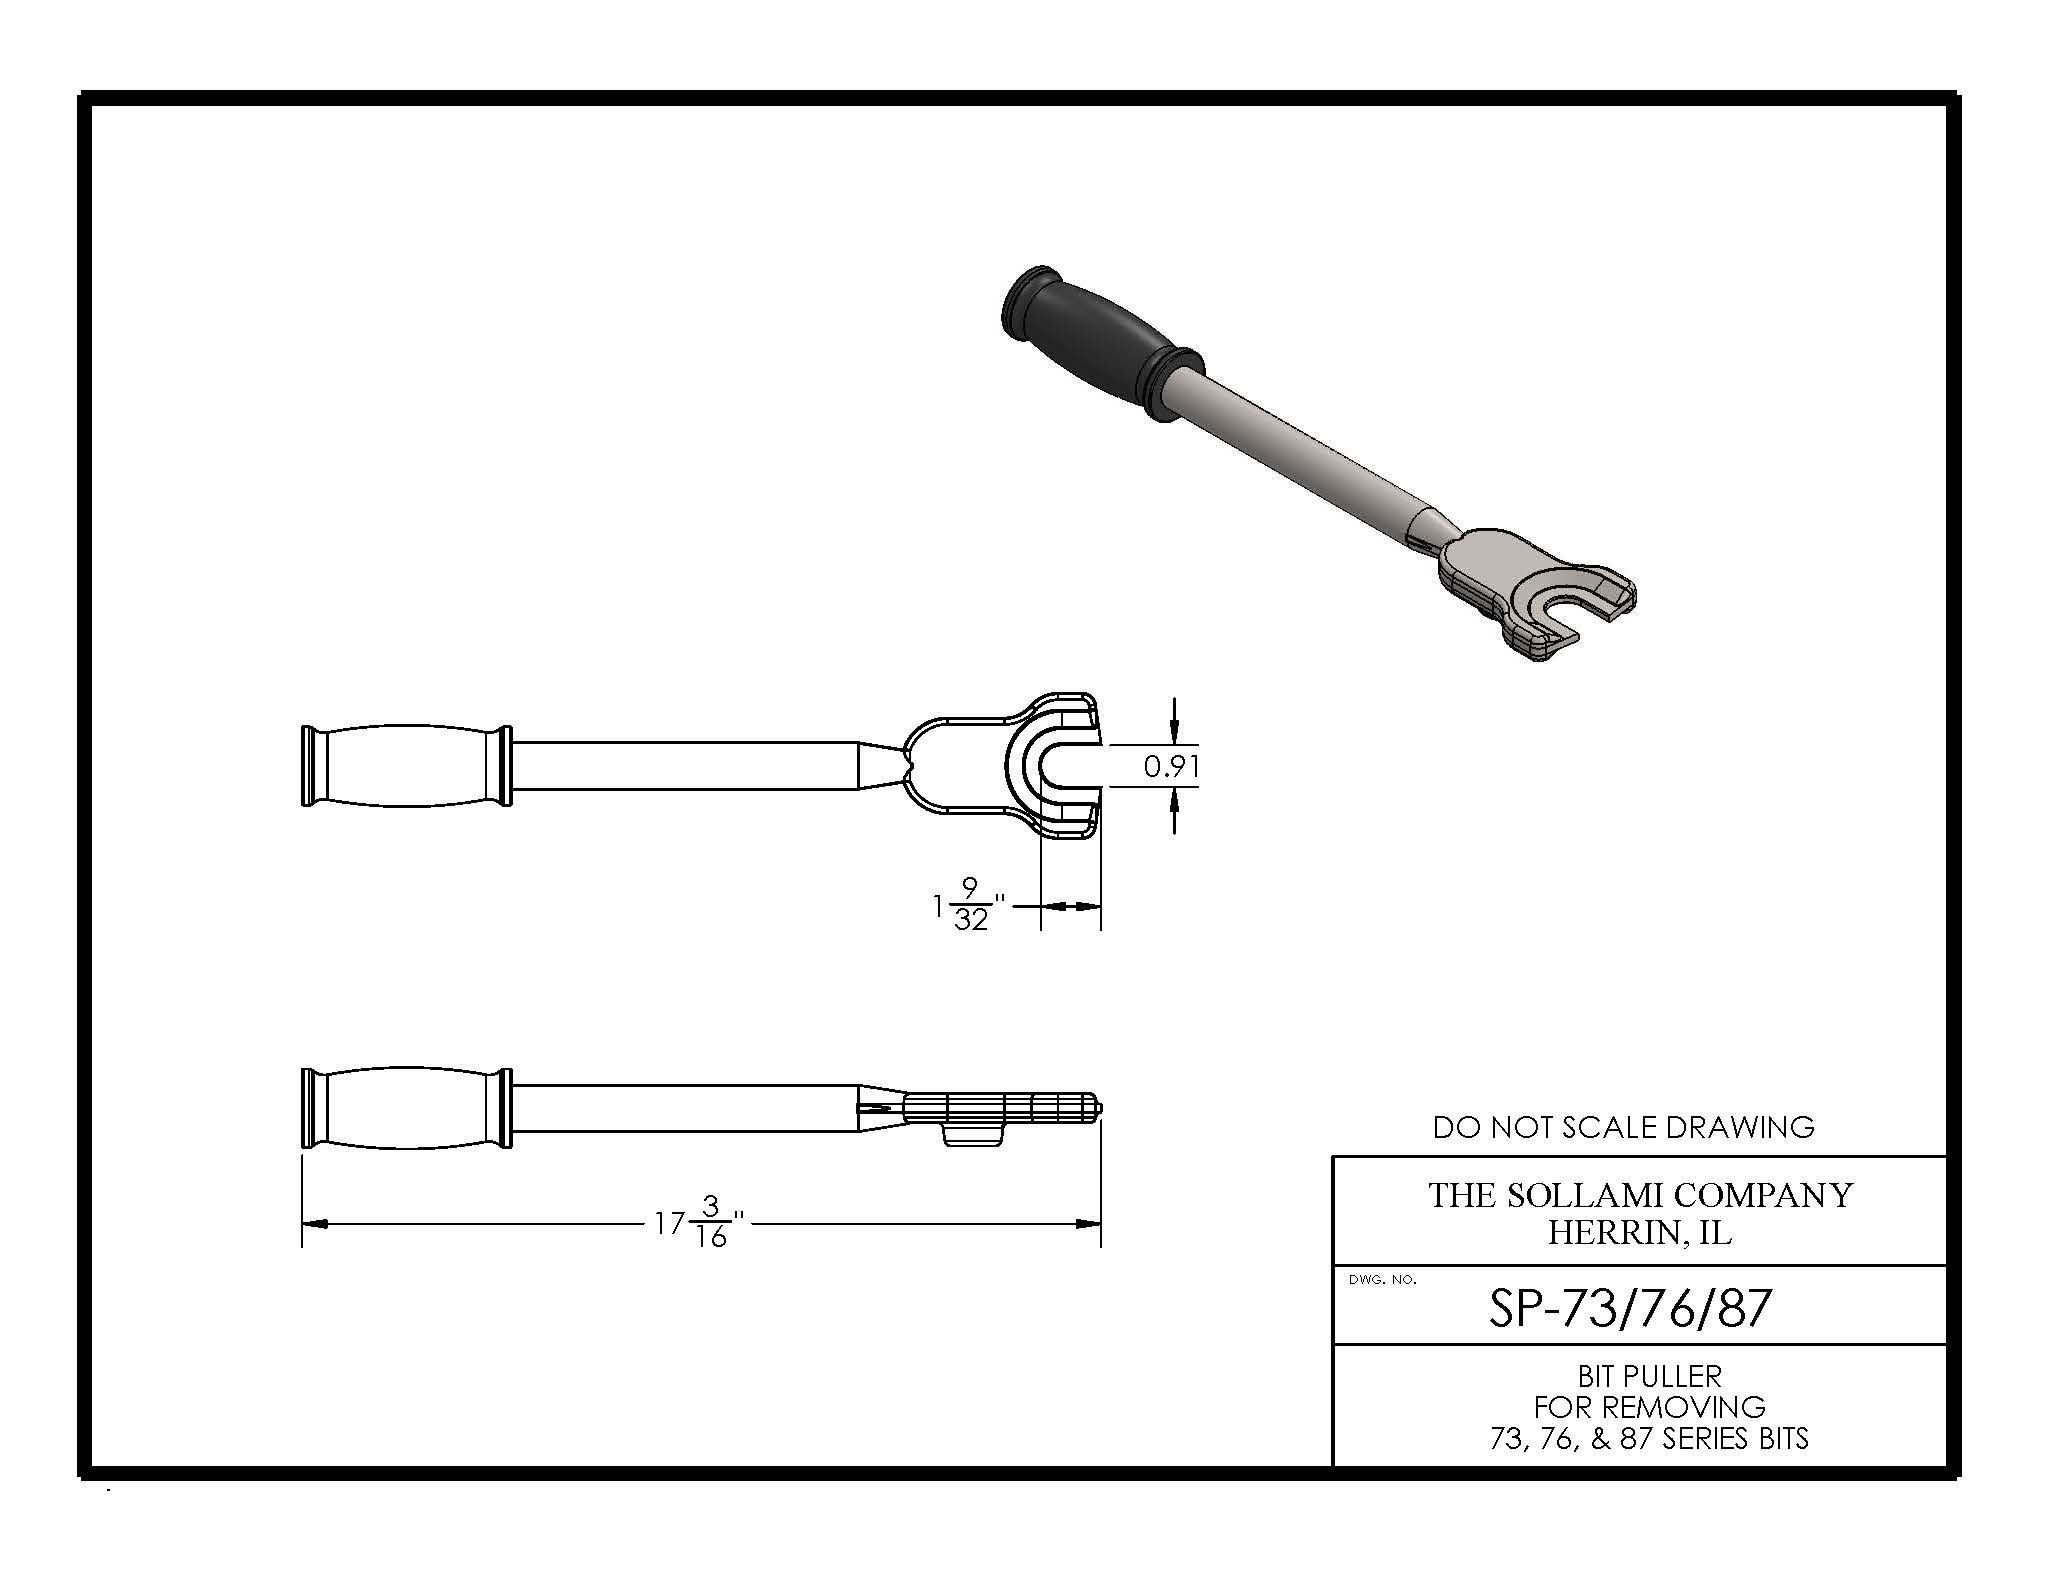 Sollami Company Bit Puller for Removing 73, 76, and 87 Series Bits